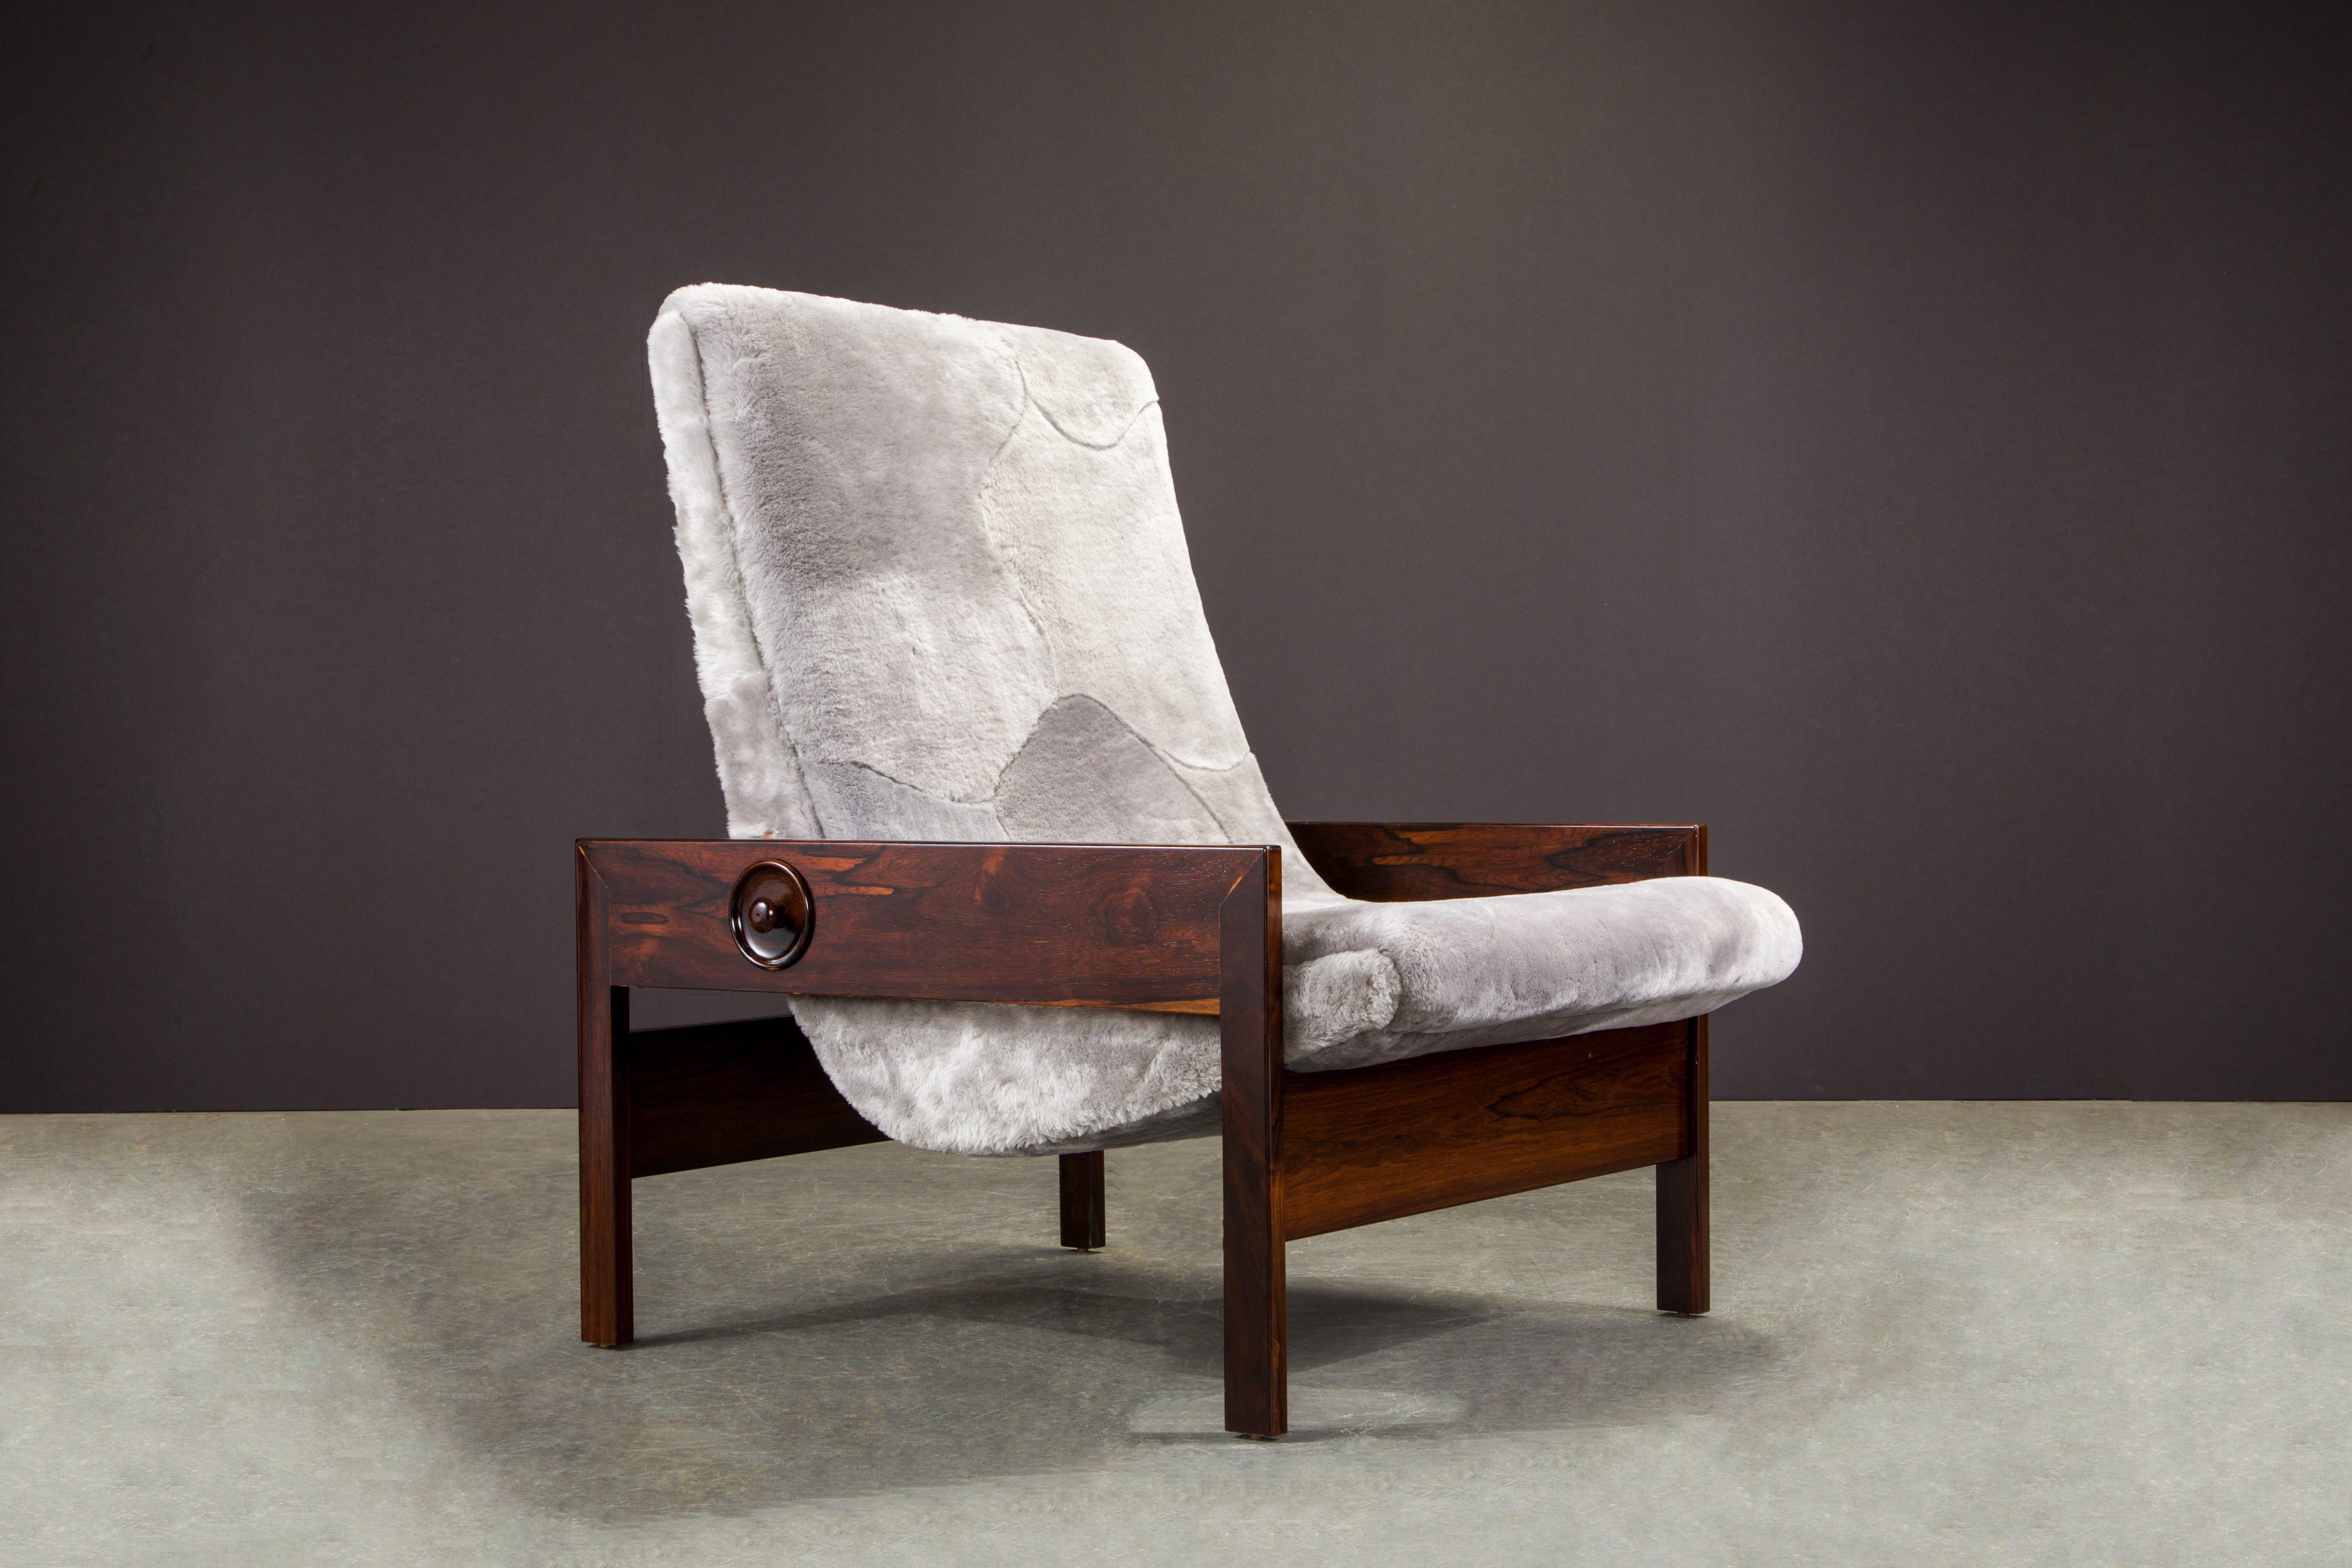 Mid-20th Century Sergio Rodrigues 'Gio' Chairs in Rosewood and Edelman Shearling, 1960s Brazil